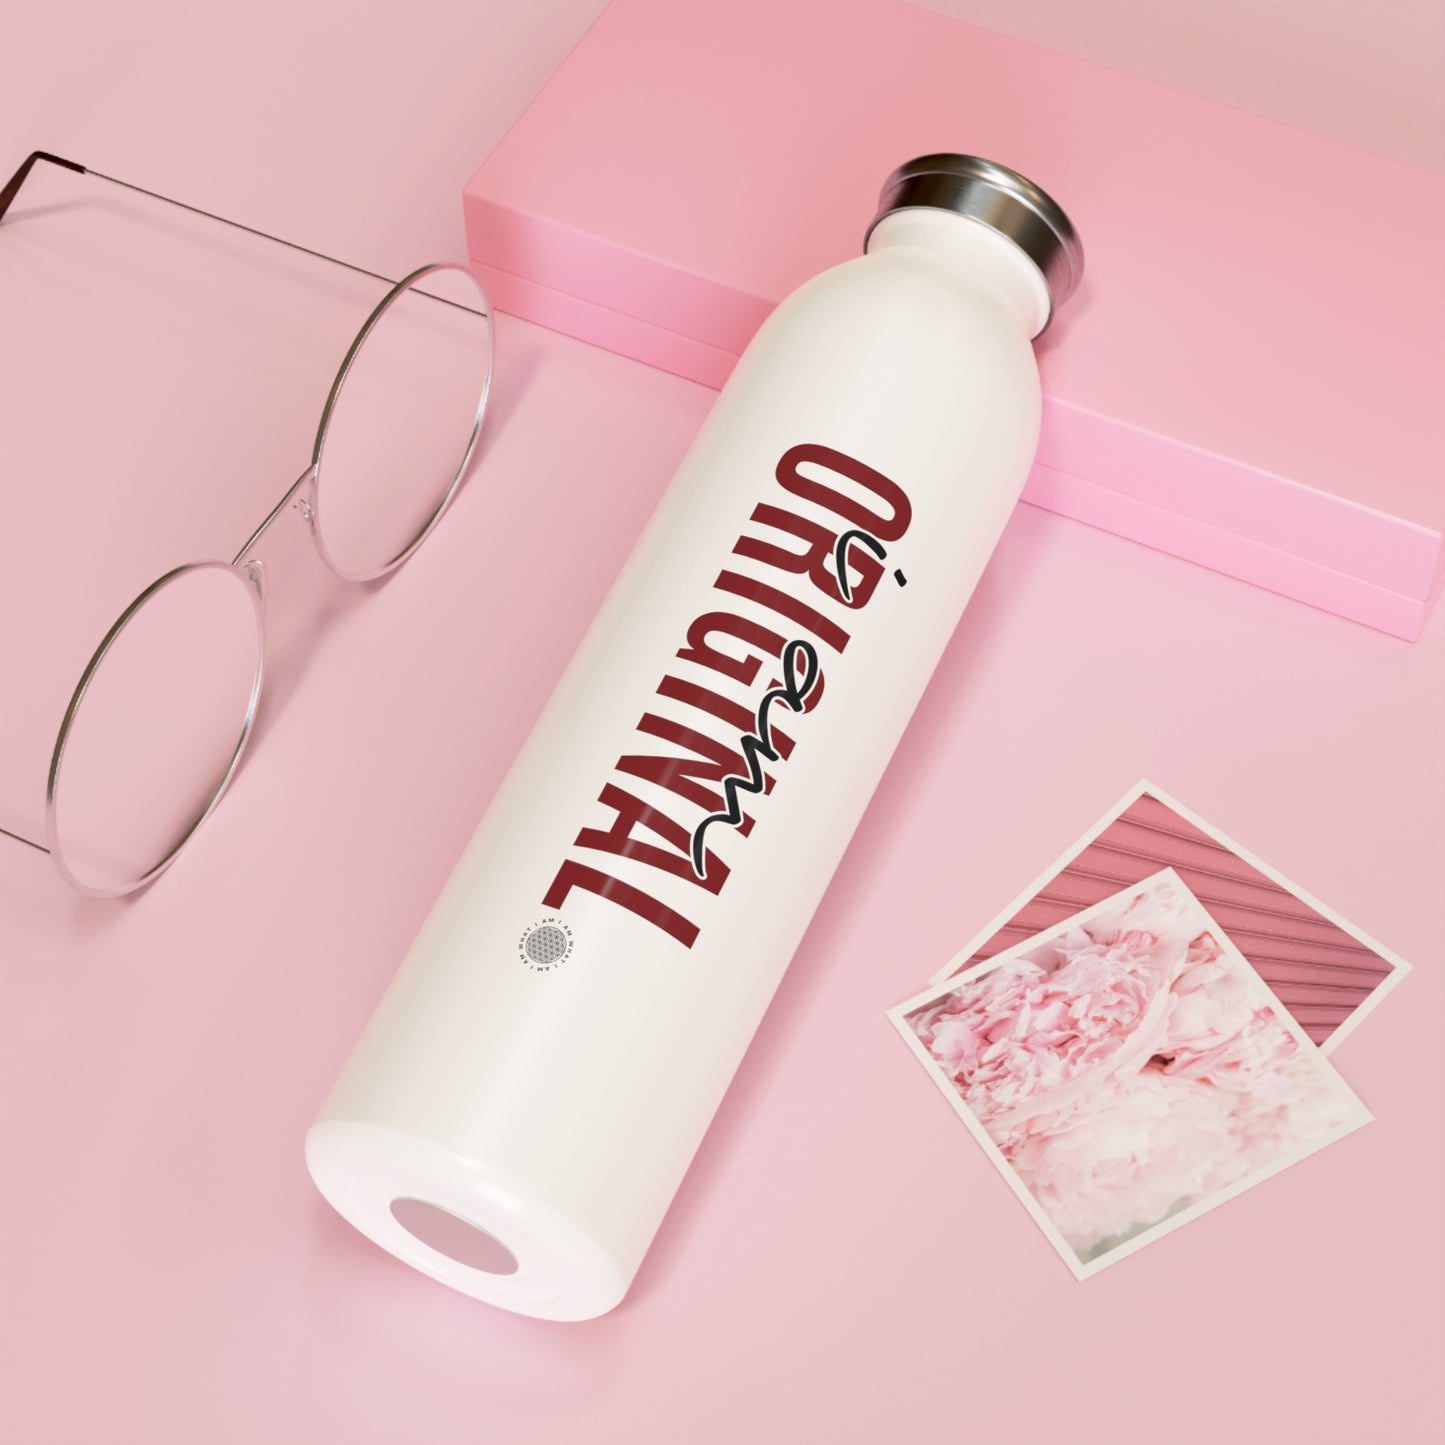 Our I Am Original affirmation water bottle is one of our positive affirmations for mental health. Positive thinking keeps our mindset happy and healthy. This personalized water bottle was designed to become a creator’s favorite canvas of expression.